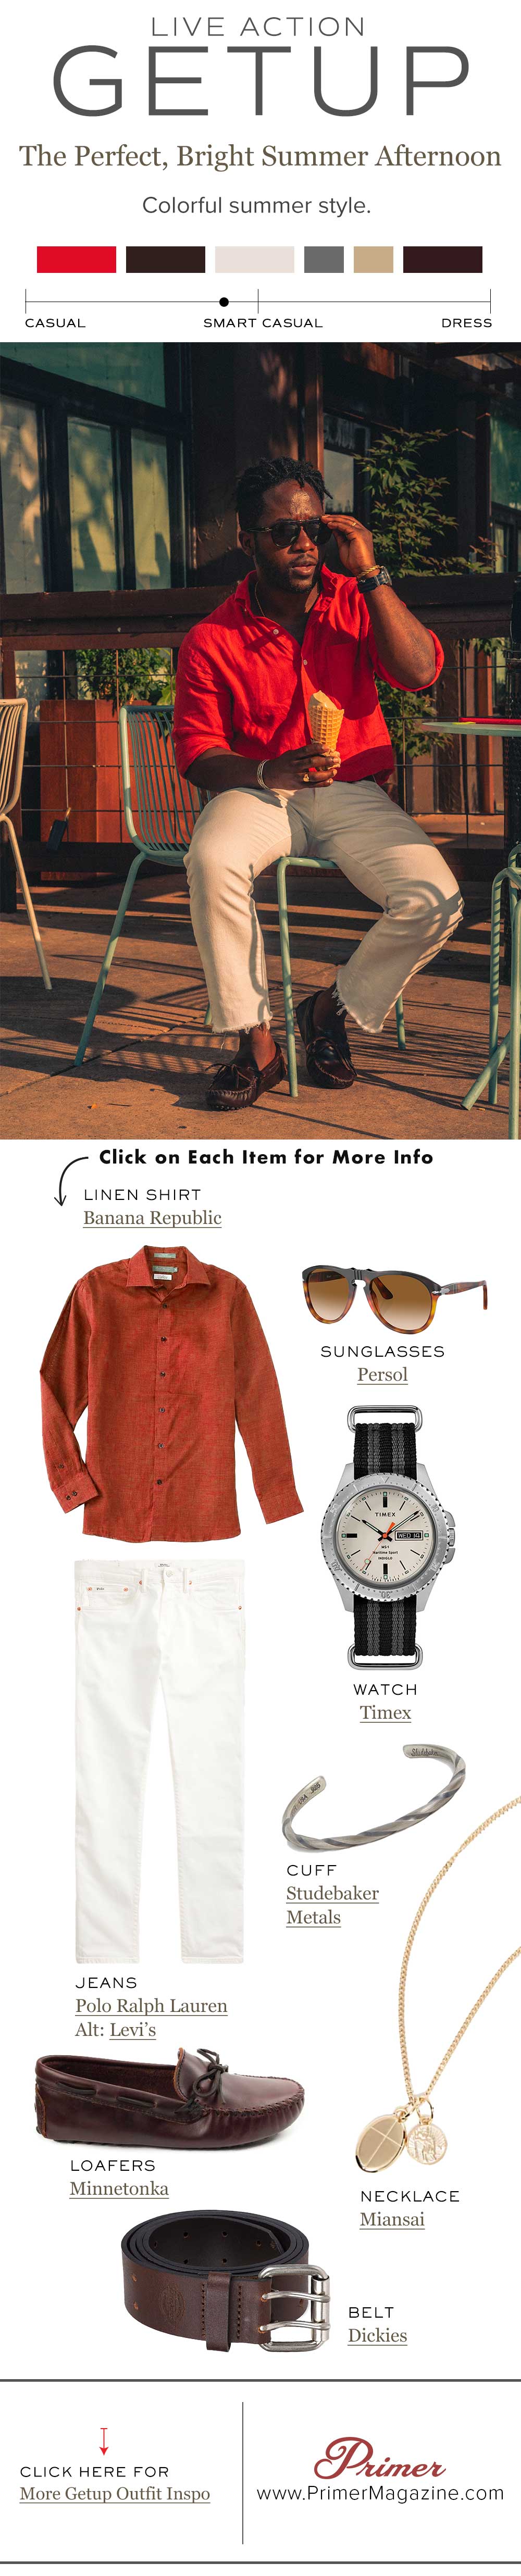 Live Action Getup: The Perfect, Bright Summer Afternoon infographic for men's outfit idea